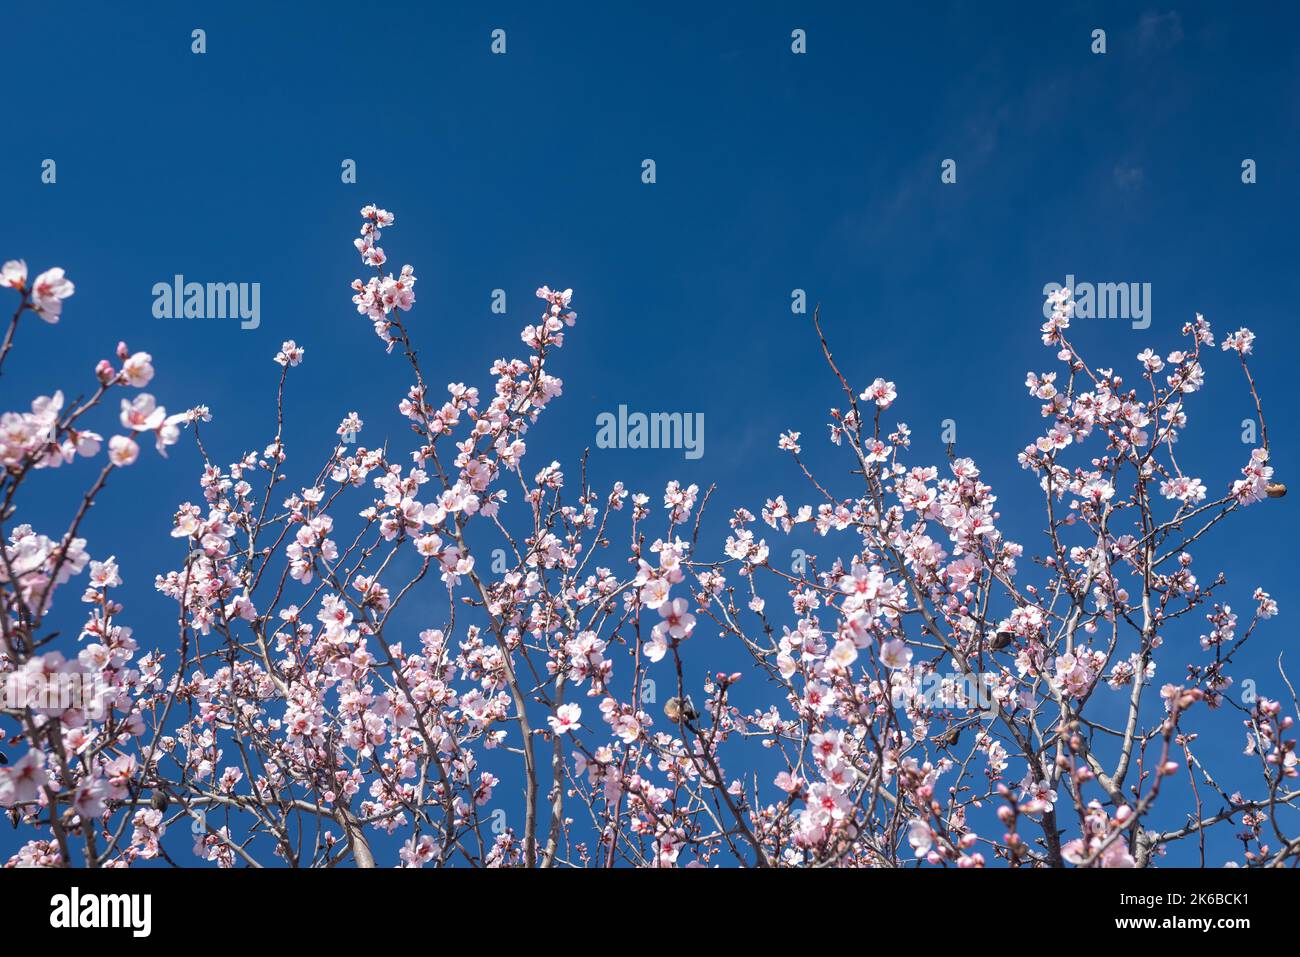 Almond flowers against blue sky background. Almond blossom branches. Copy space Stock Photo